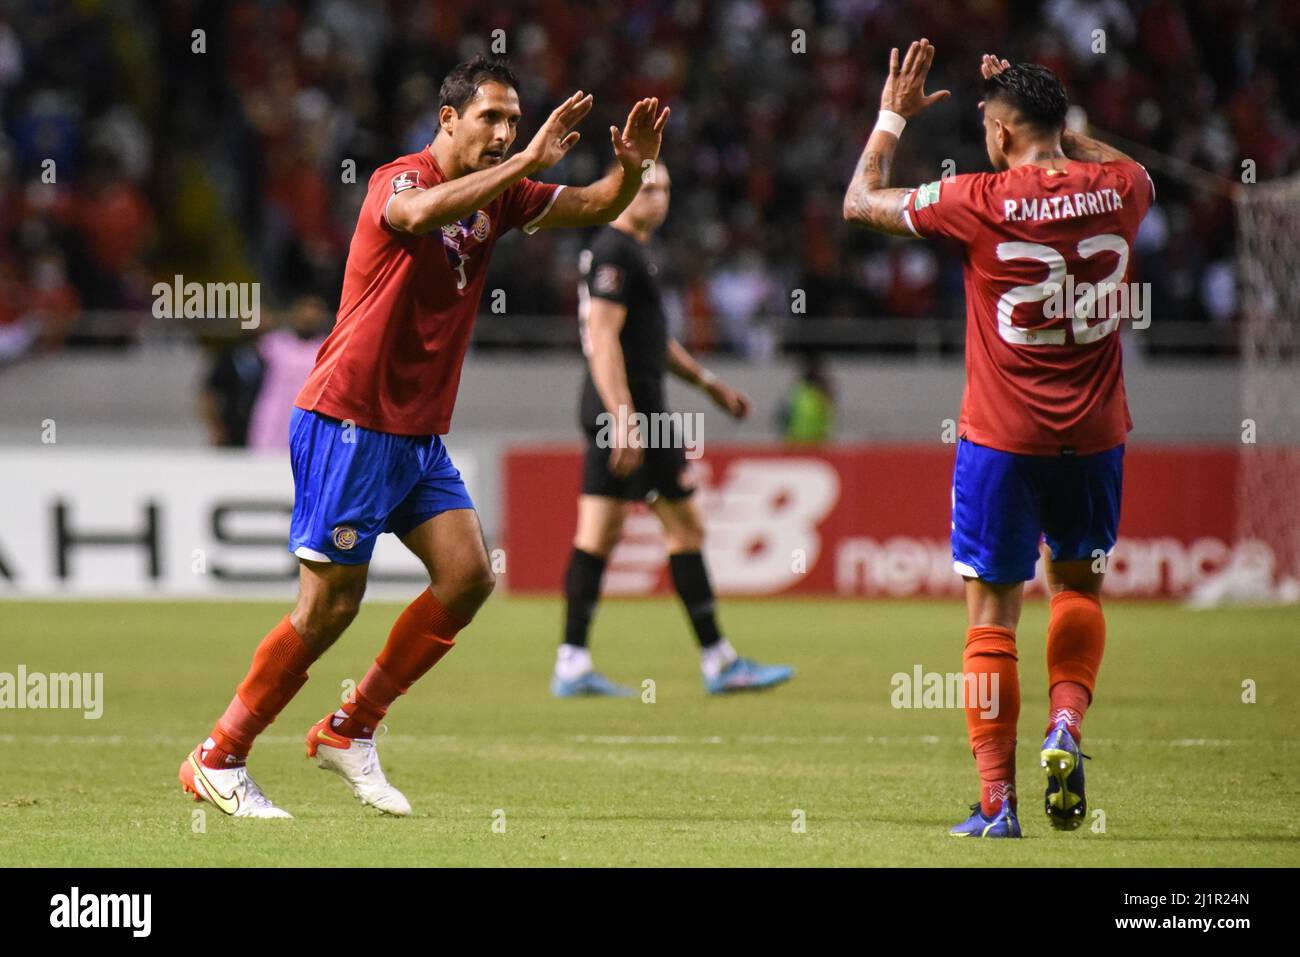 SAN JOSE, Costa Rica: Celso Borges (L) and Ronald Matarrita (R), celebrate goal scoring during the 1-0 Costa Rica victory over Canada in the Concacaf Stock Photo